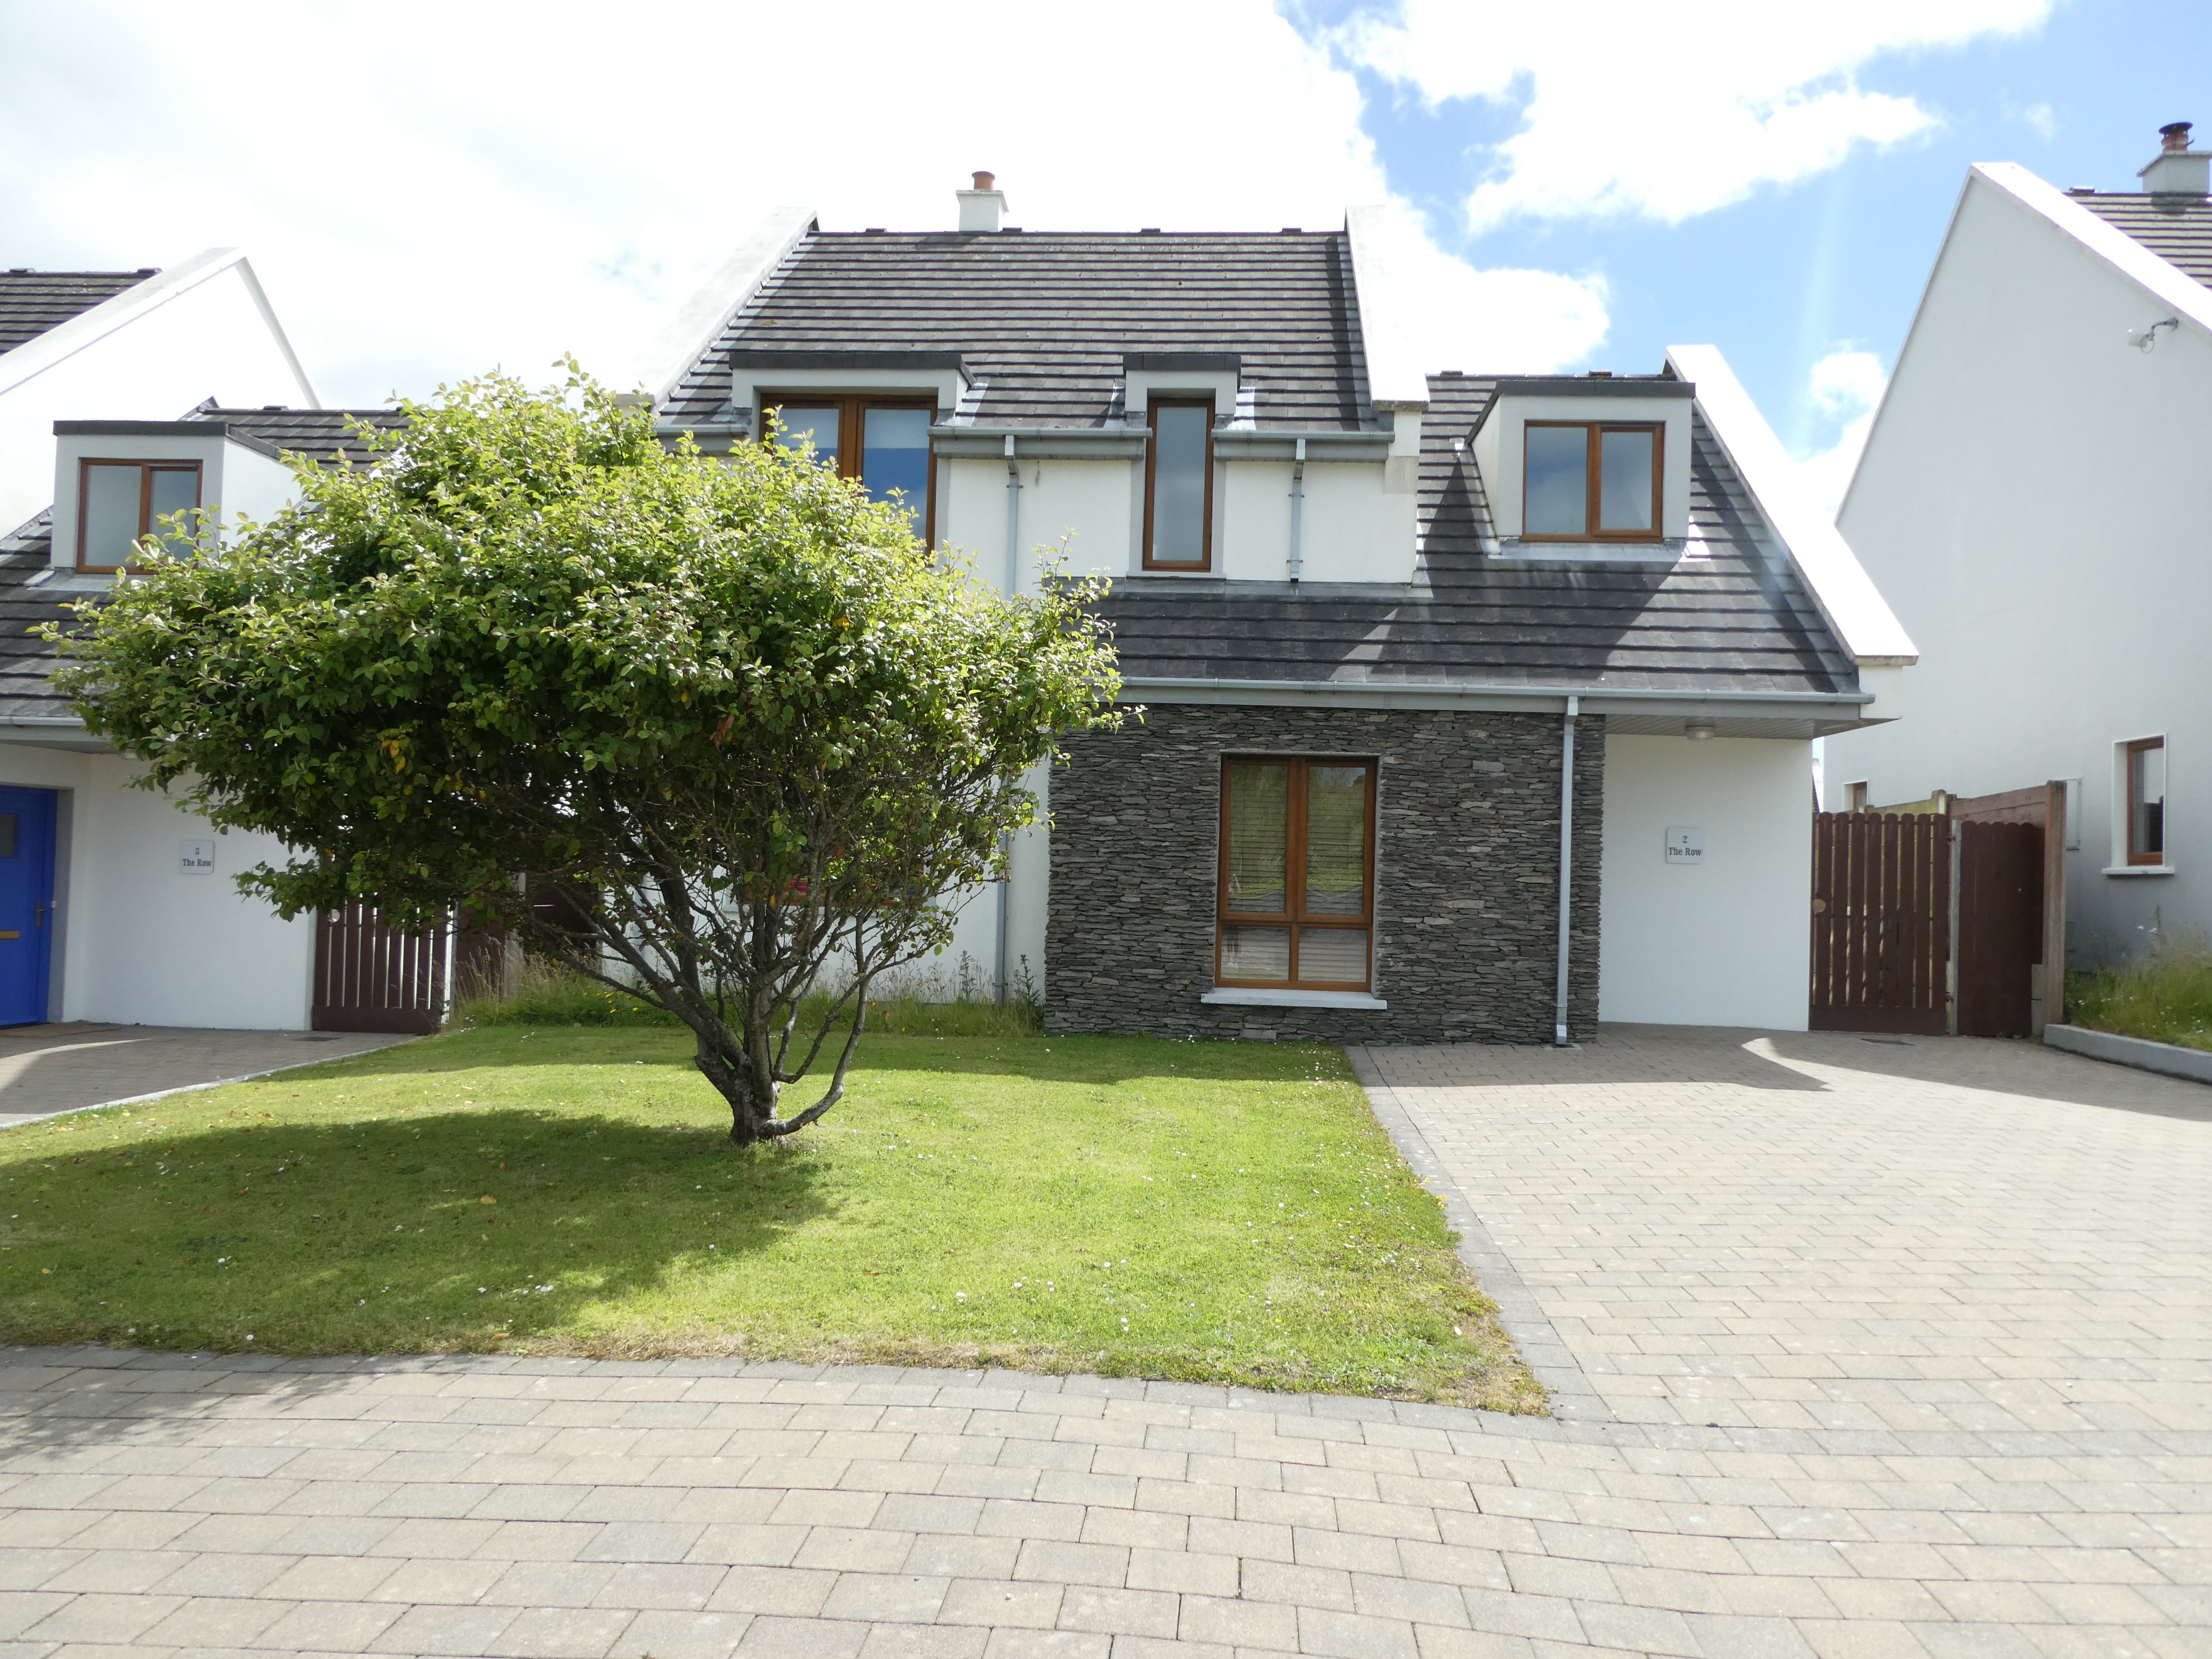 2 The Row, Southview Terrace, Waterville, Co. Kerry